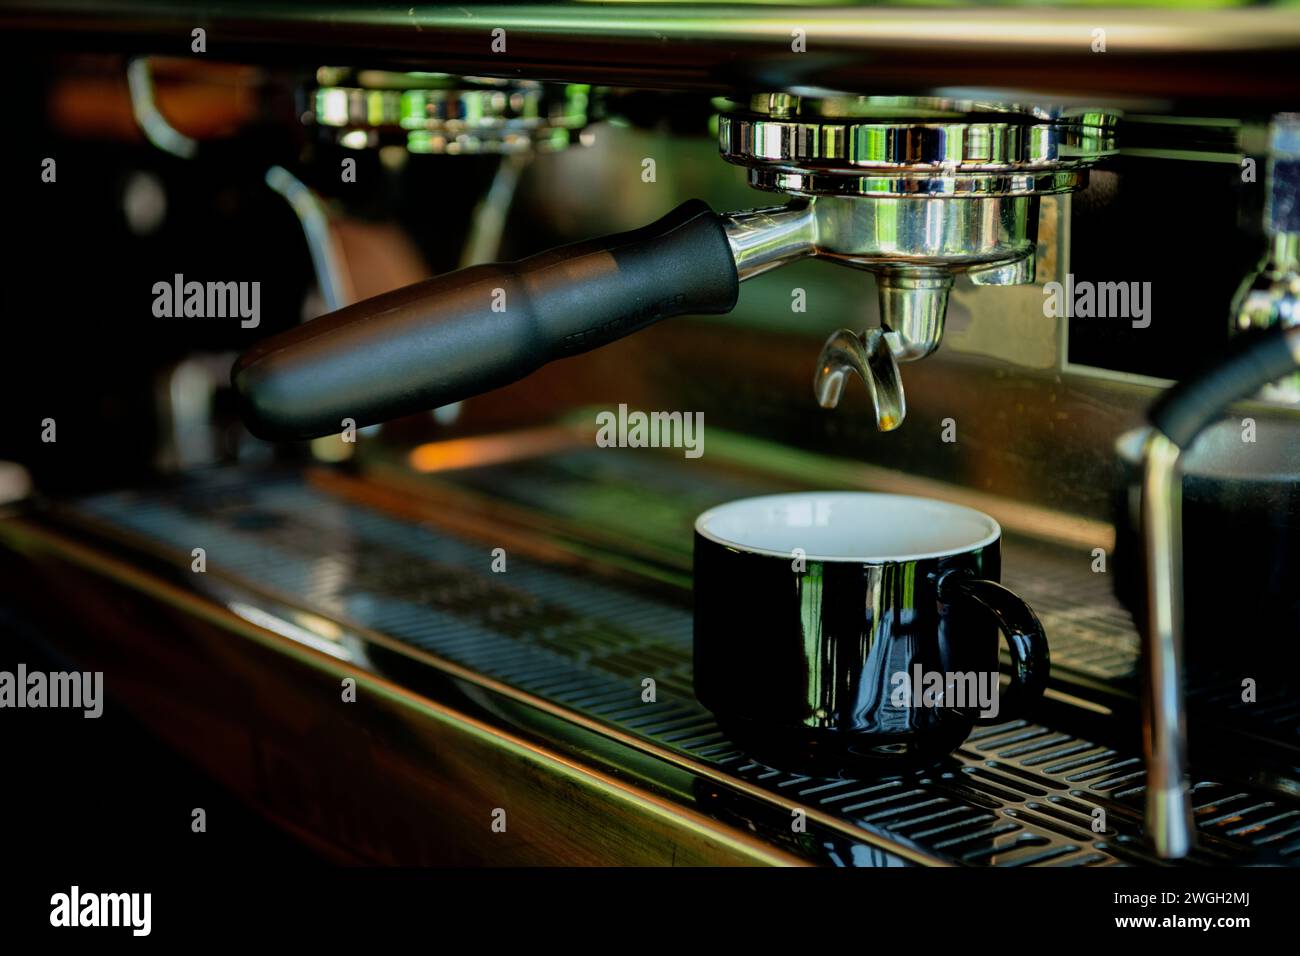 Close-up of espresso pouring from coffee machine - stock photo Stock Photo